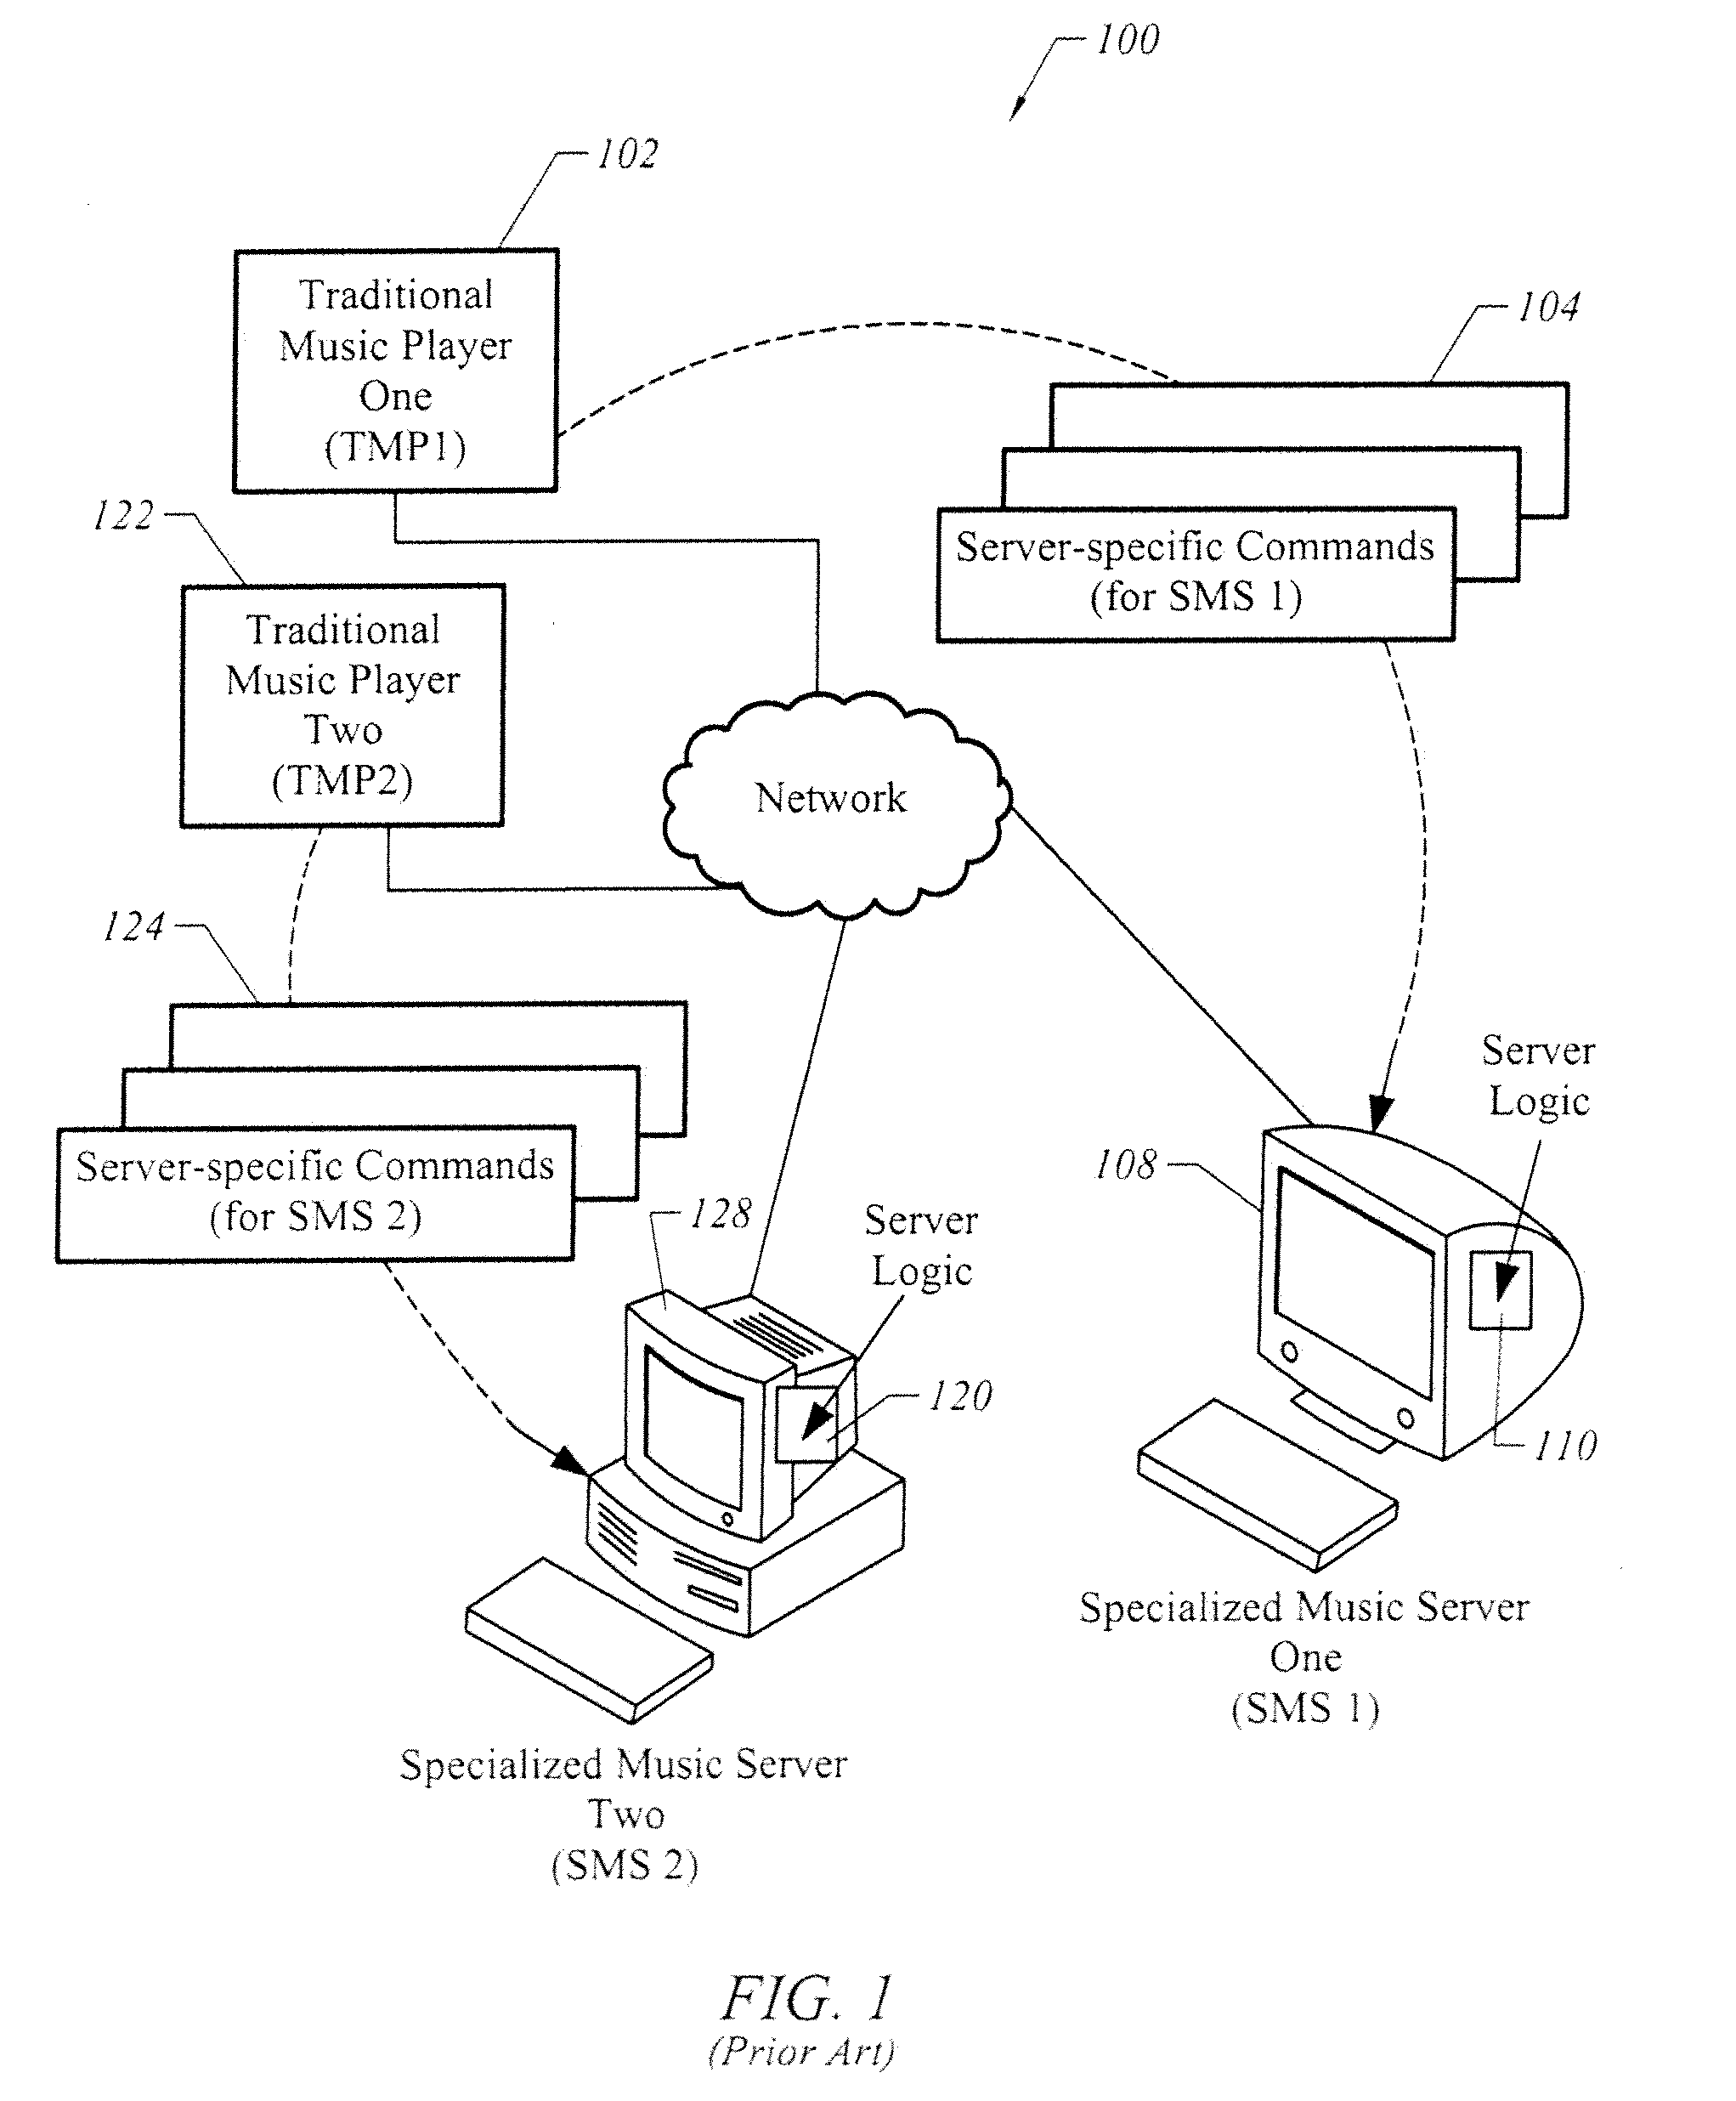 Method, apparatus, system and computer readable medium for providing a universal media interface to control a universal media apparatus